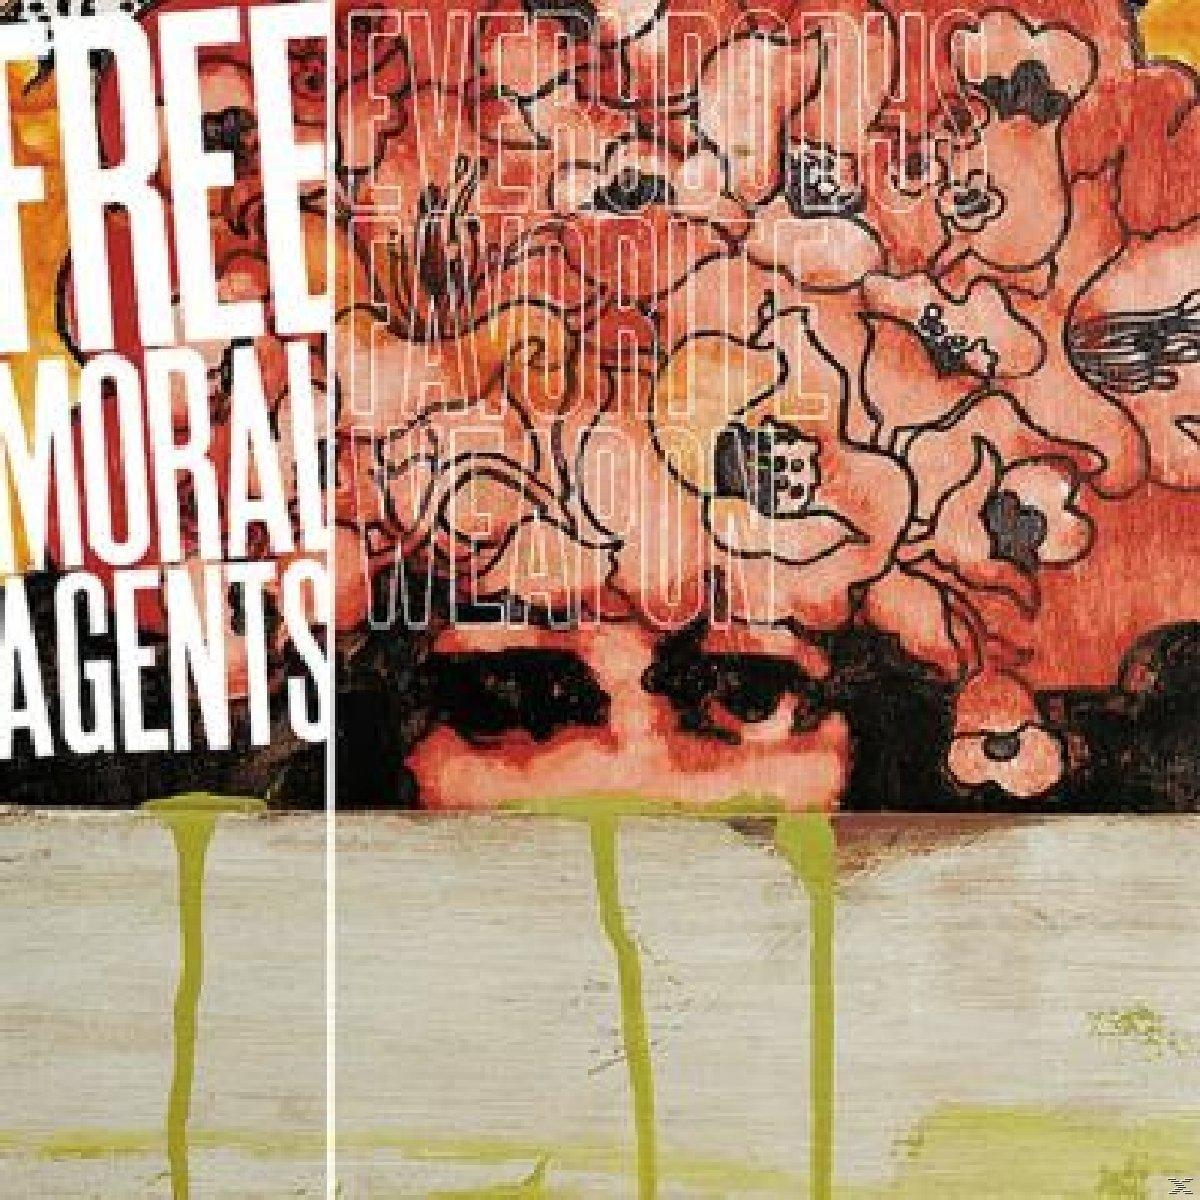 Free Everybody\'s Agents - (CD) Moral Weapon - Favorite